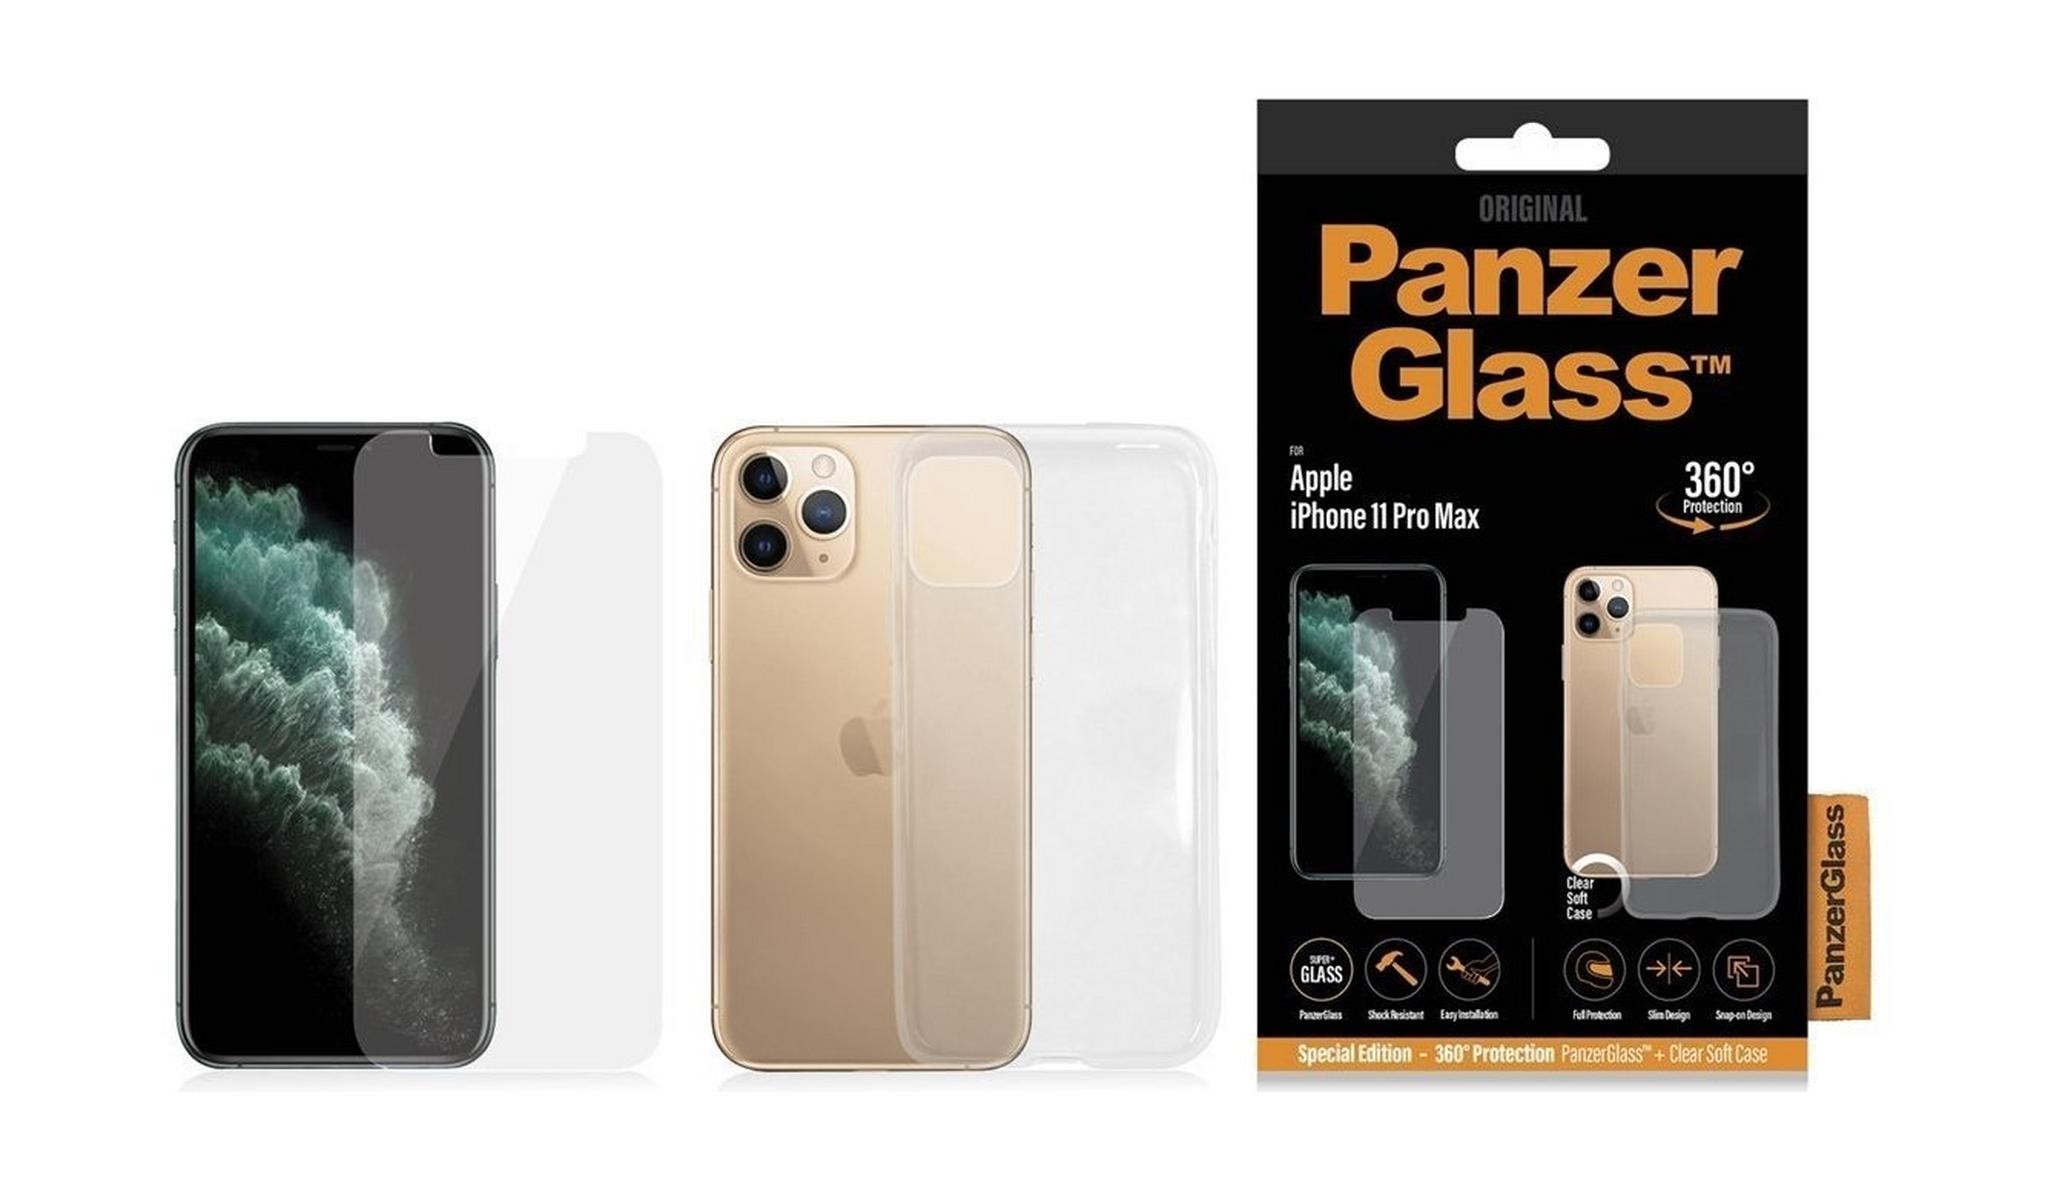 PanzerGlass Dual-360 Screen Protector & Soft Case for iPhone 11 Pro Max